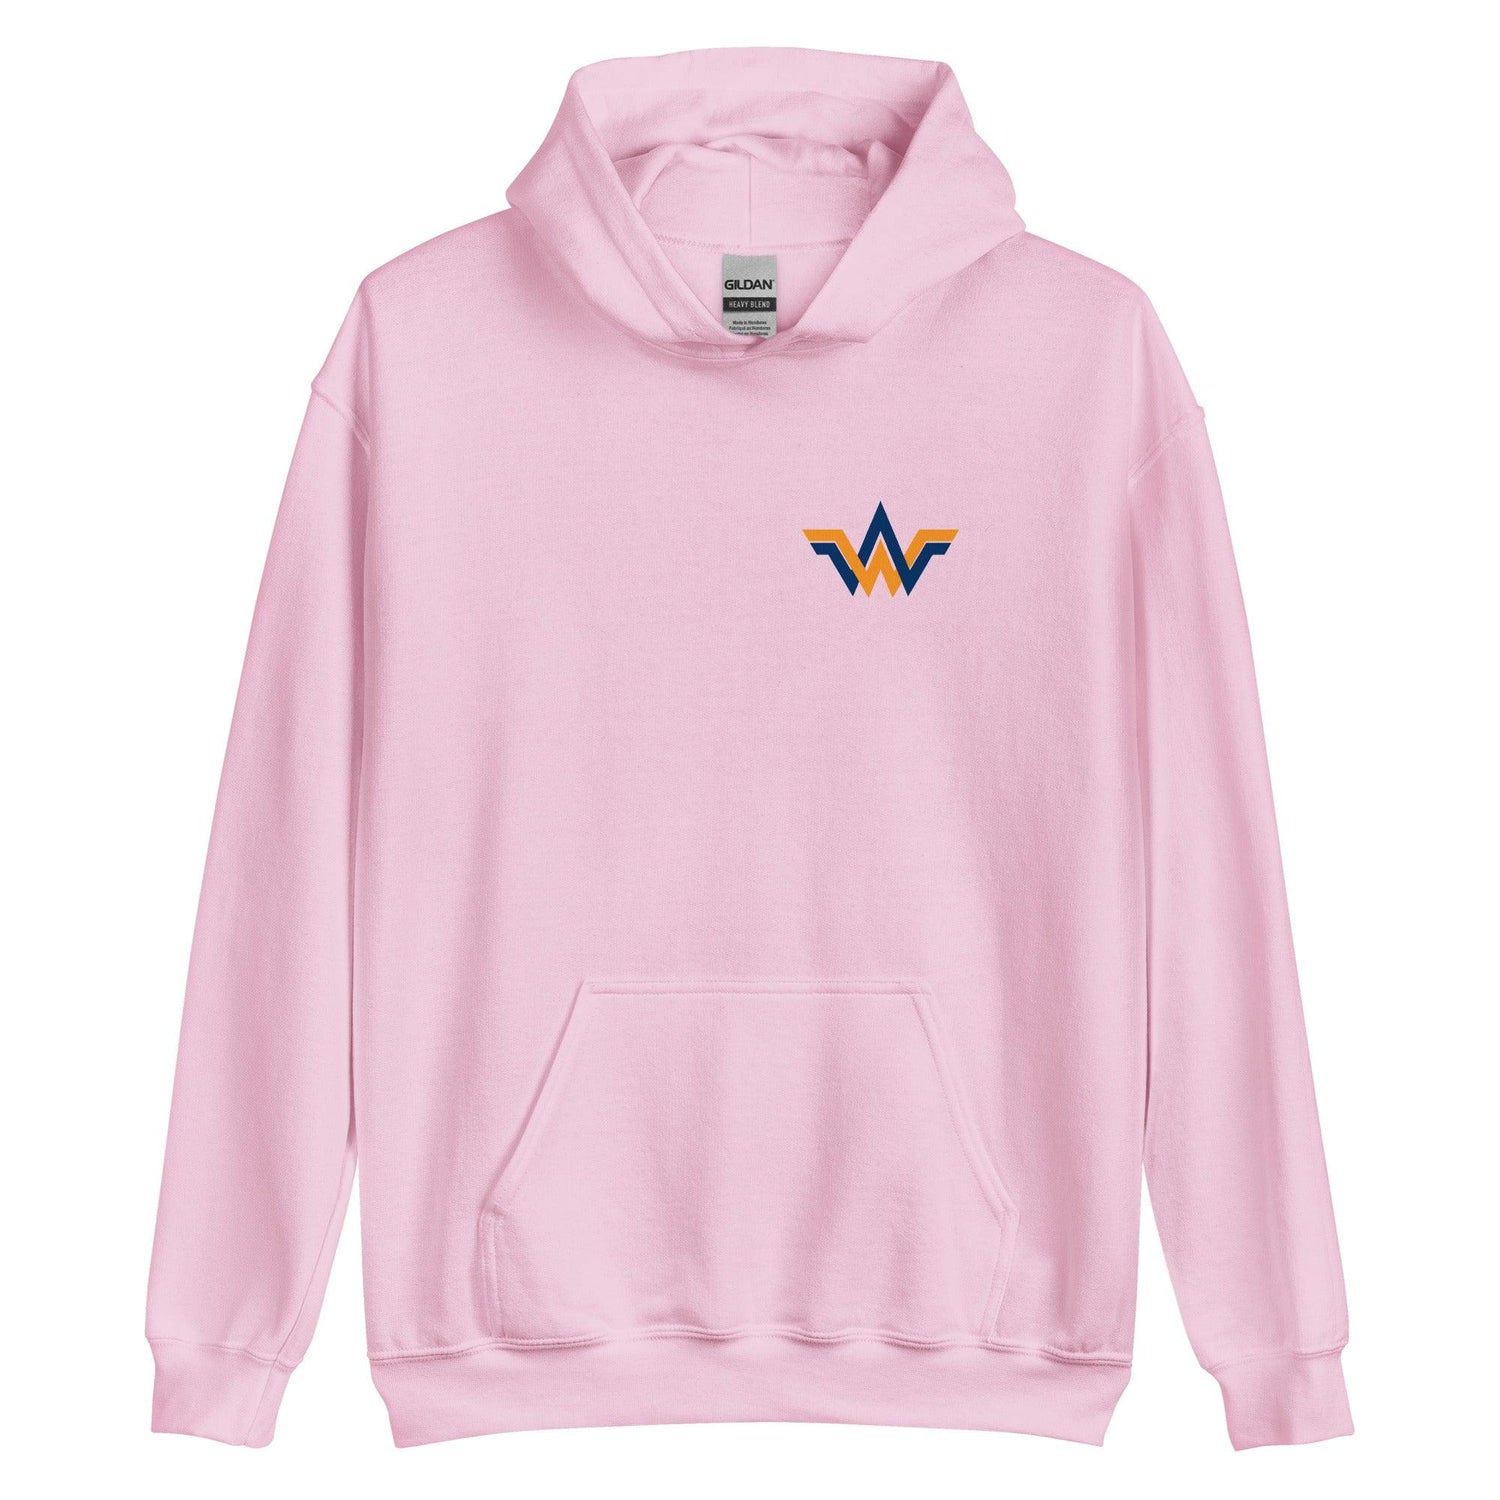 Will Wagner "Signature" Hoodie - Fan Arch